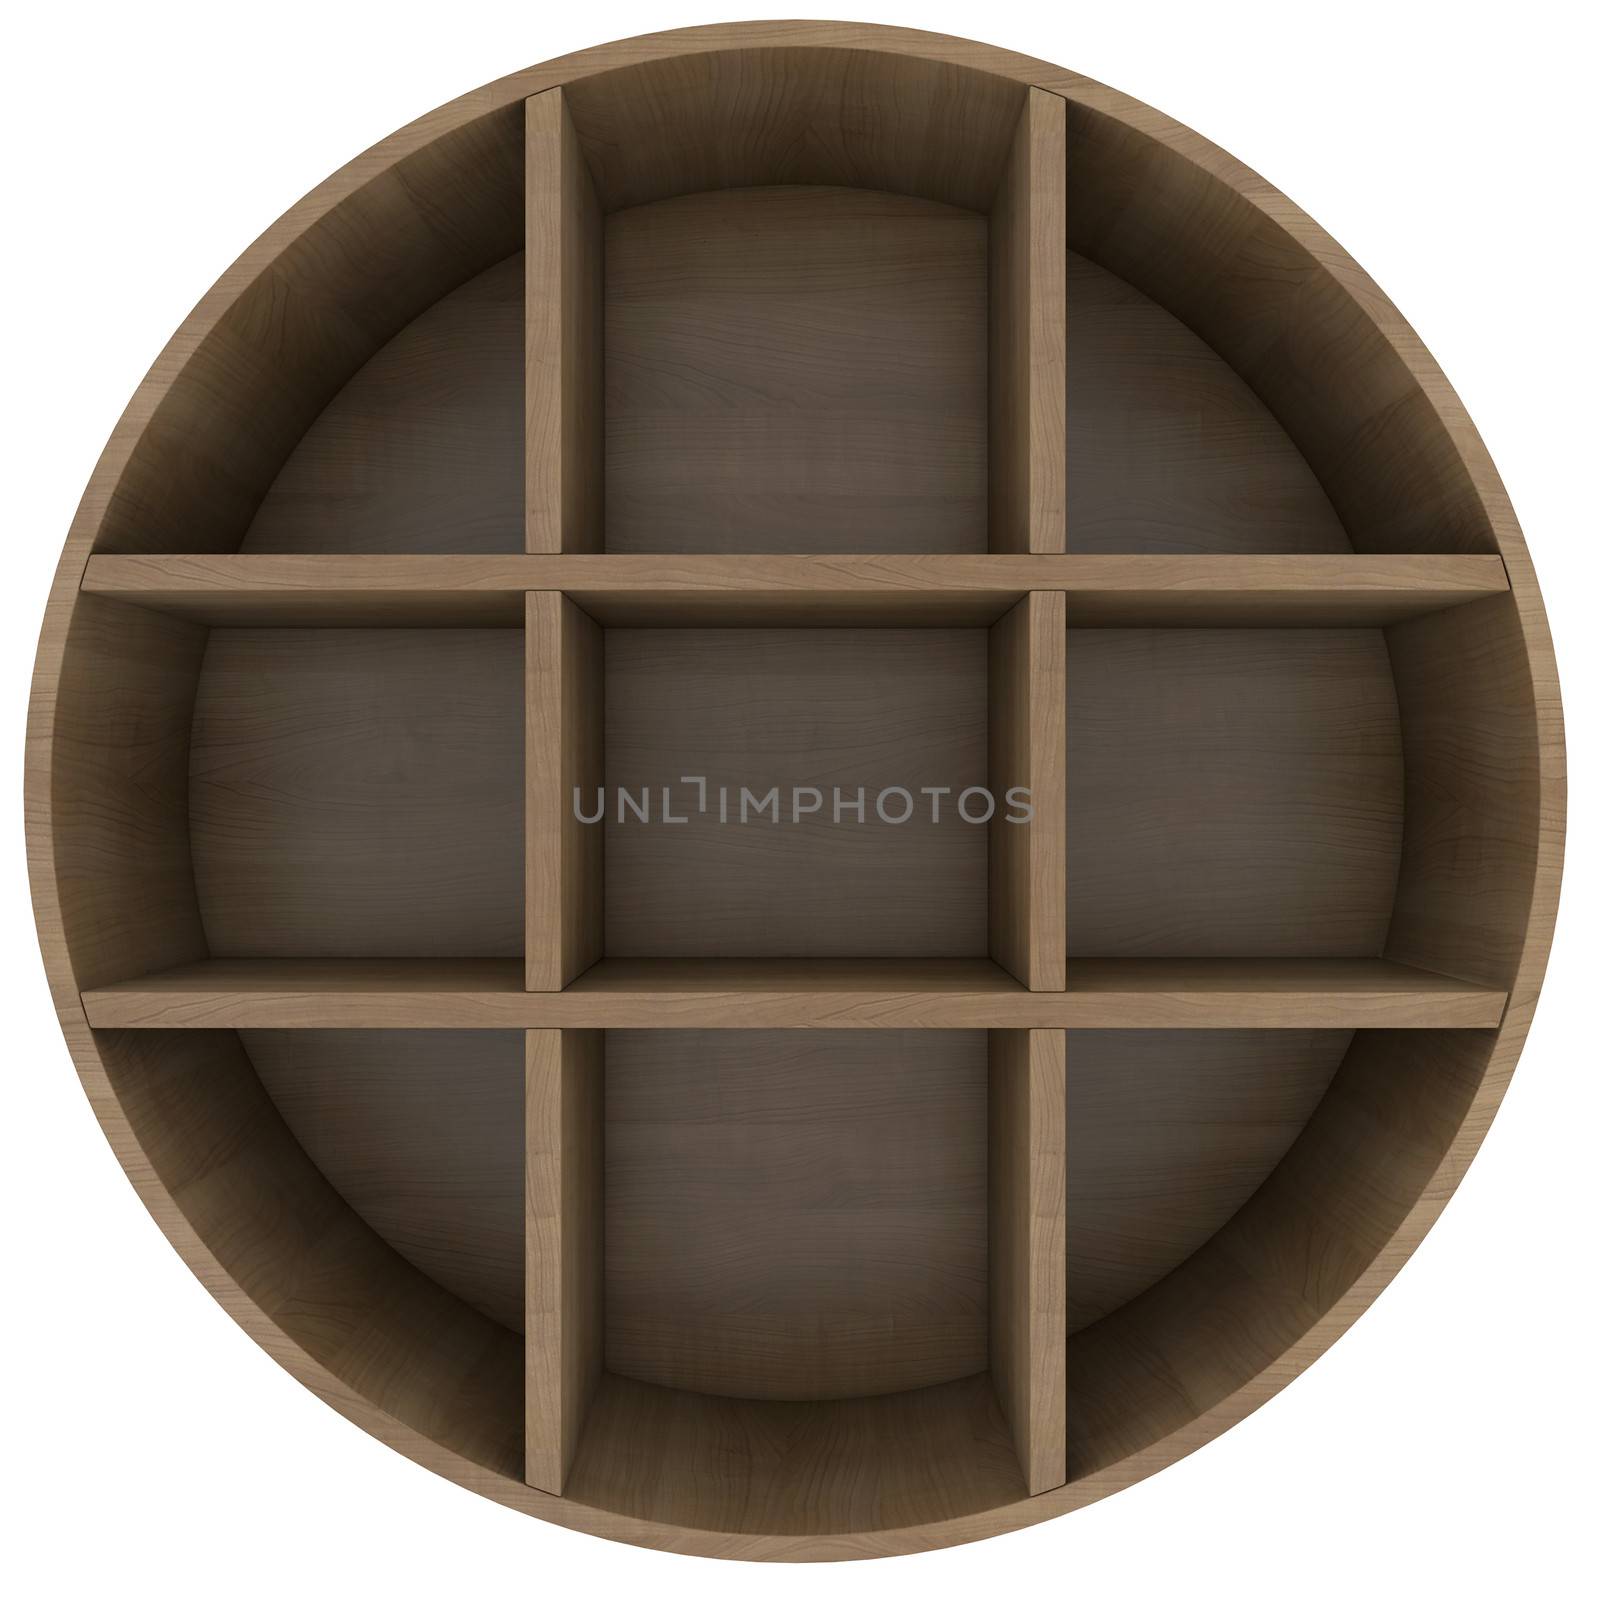 Shelves in the shape of a circle. 3d rendering on white background